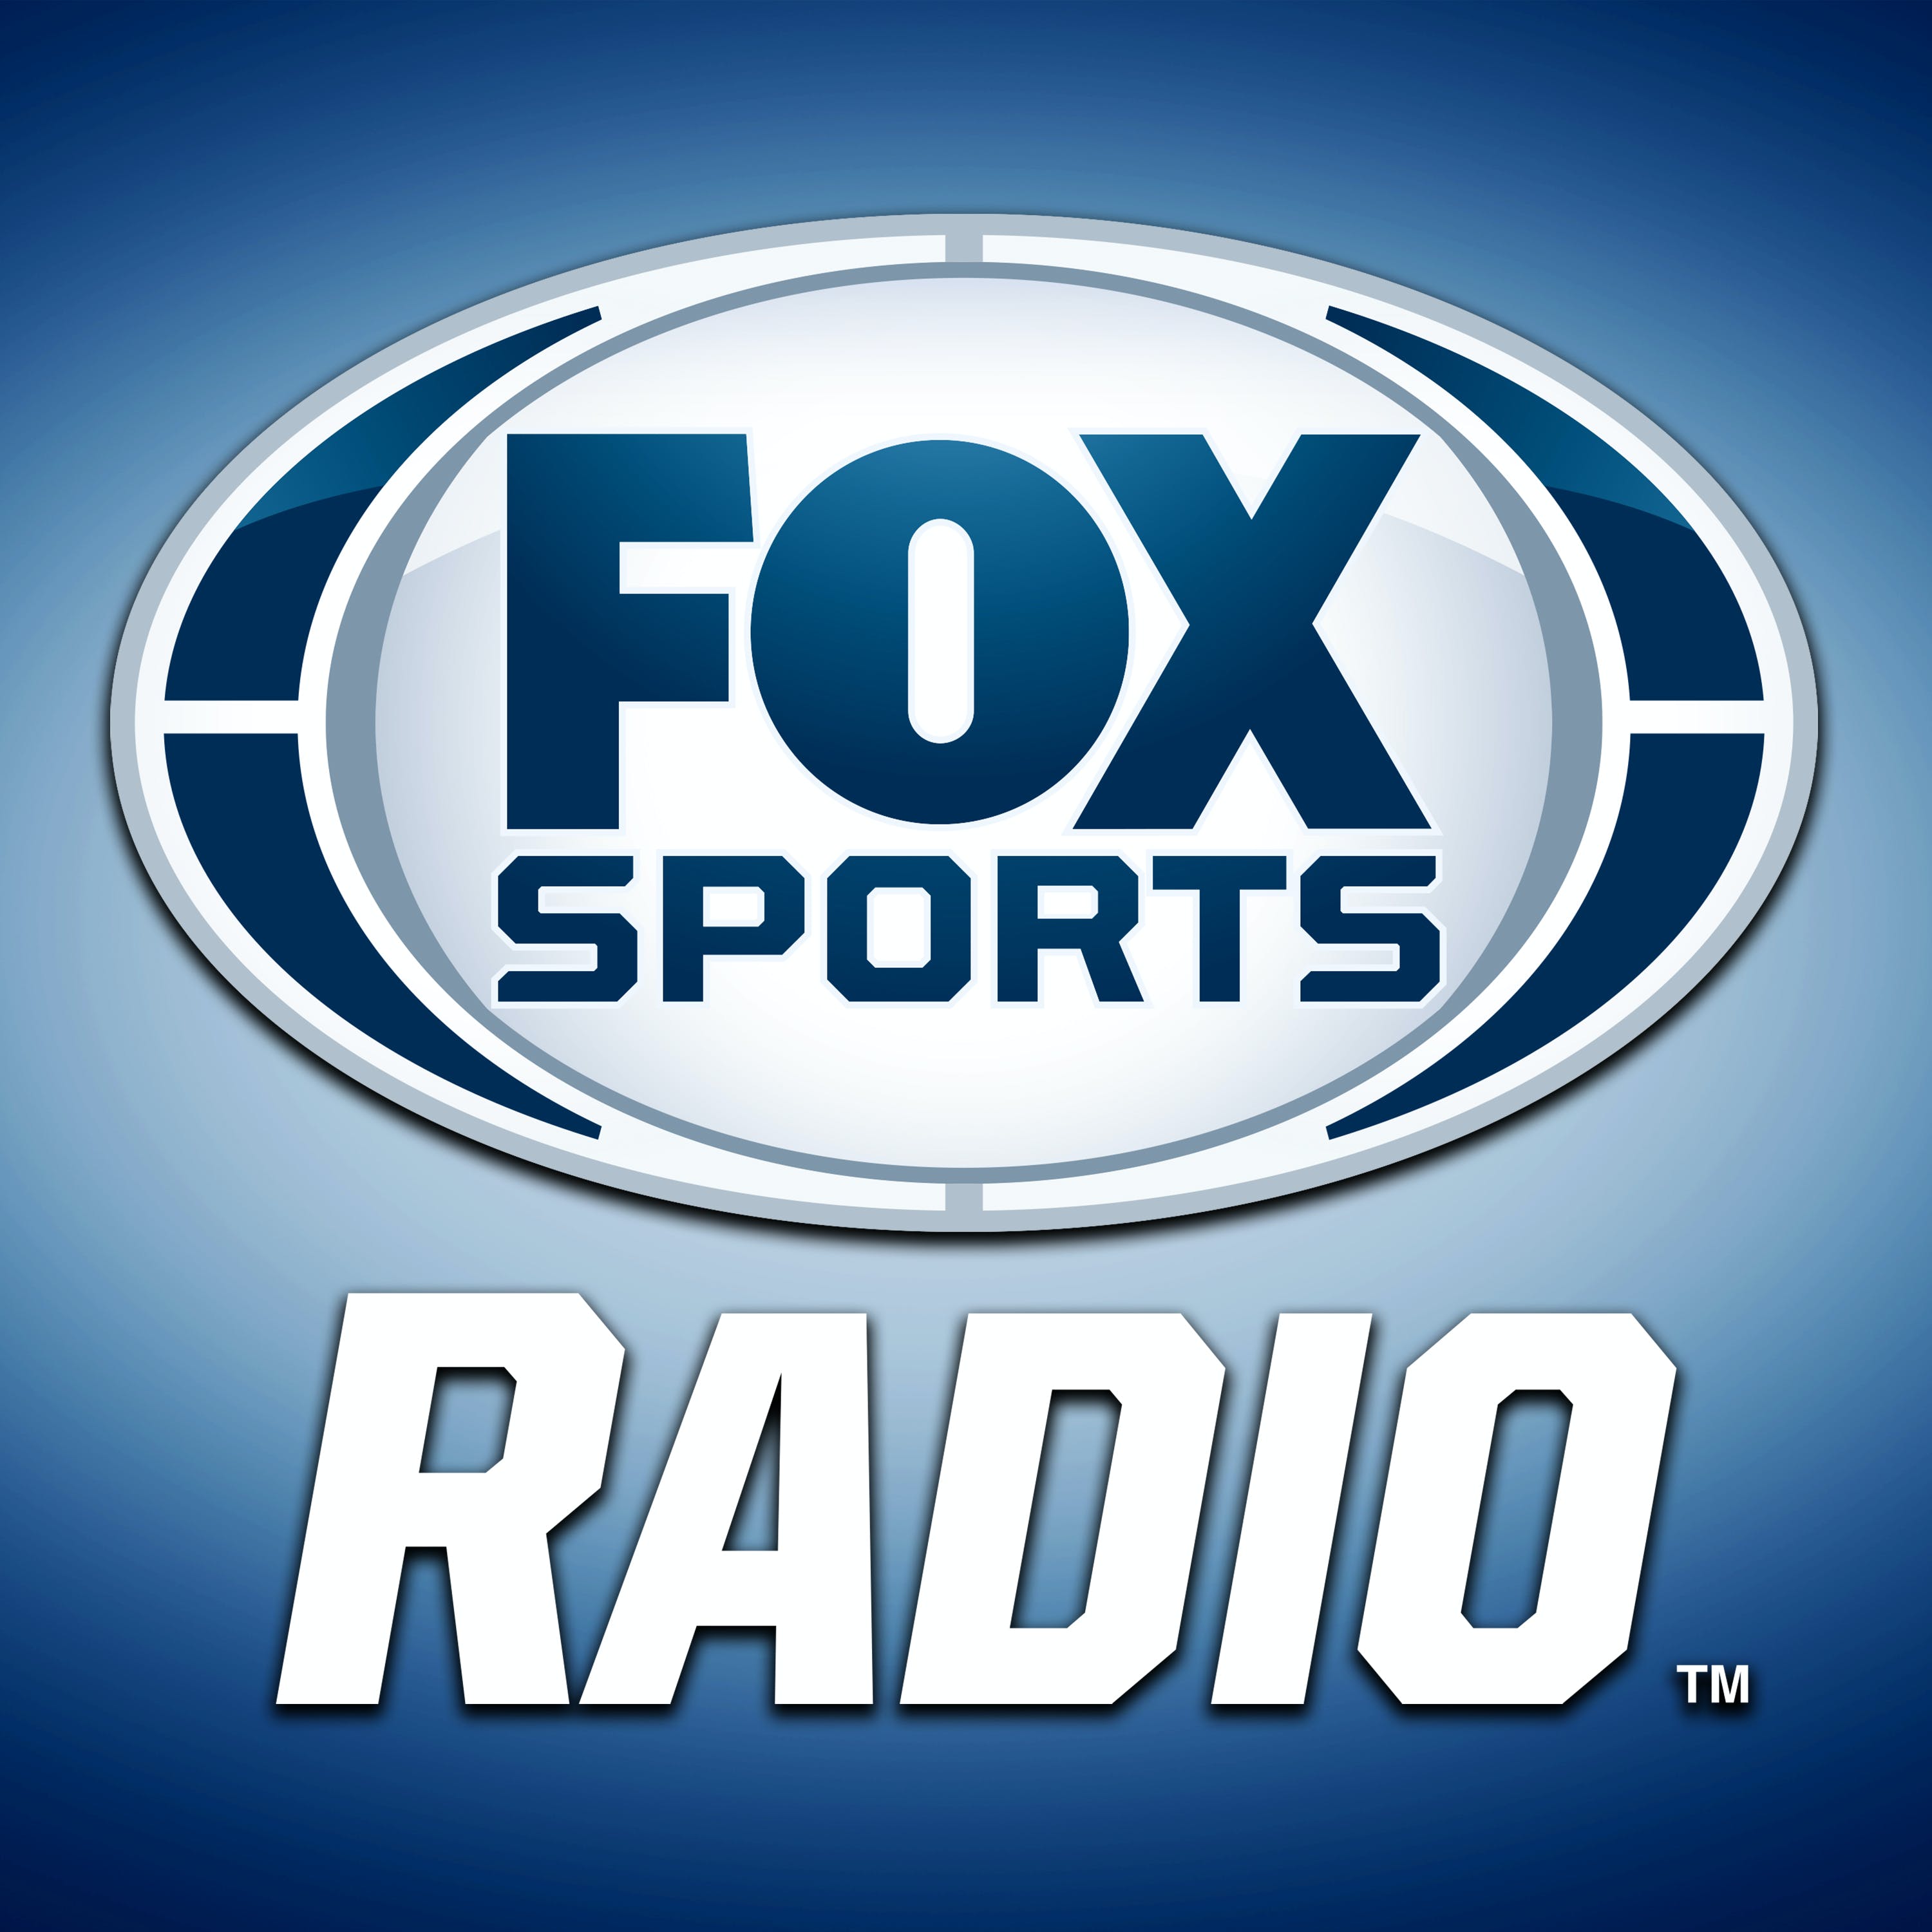 05/16/2021 - FOX Sports Sunday with Andy Furman and Brian Noe